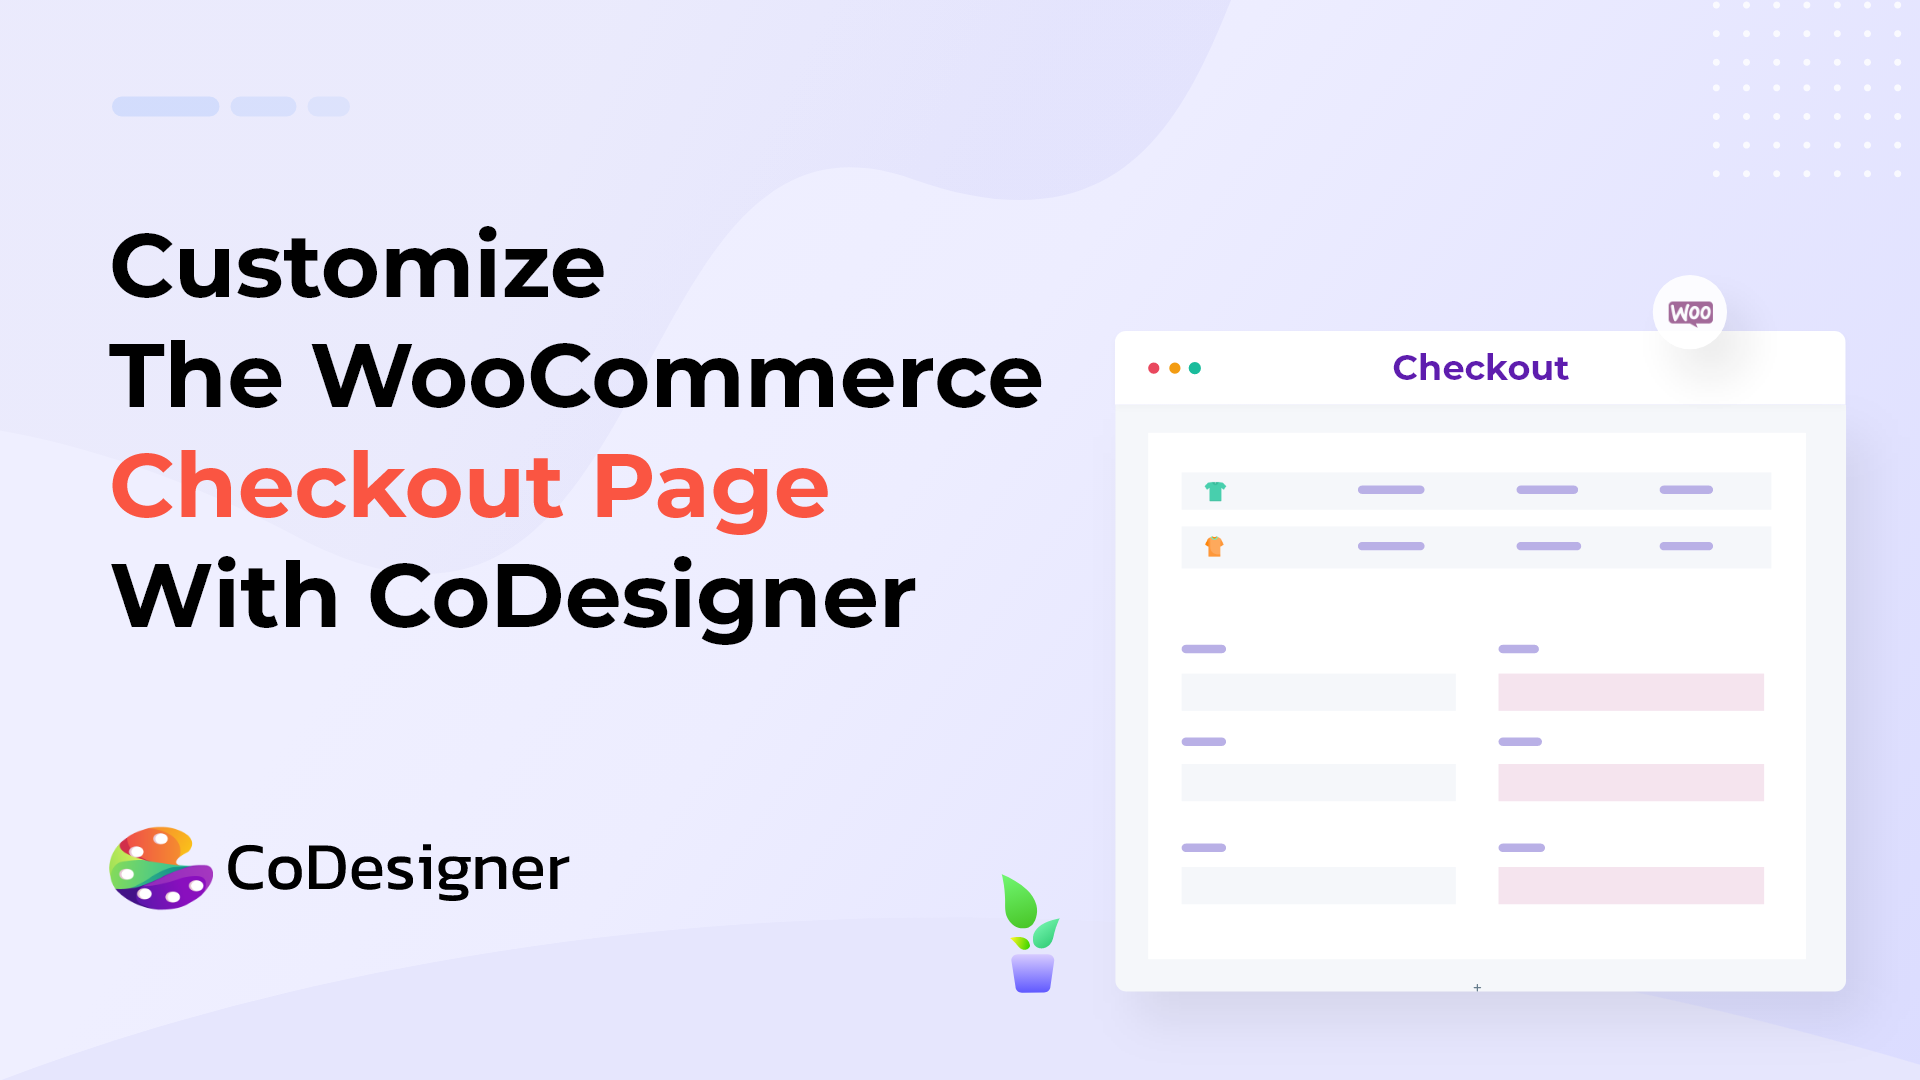 Customize the WooCommerce checkout page